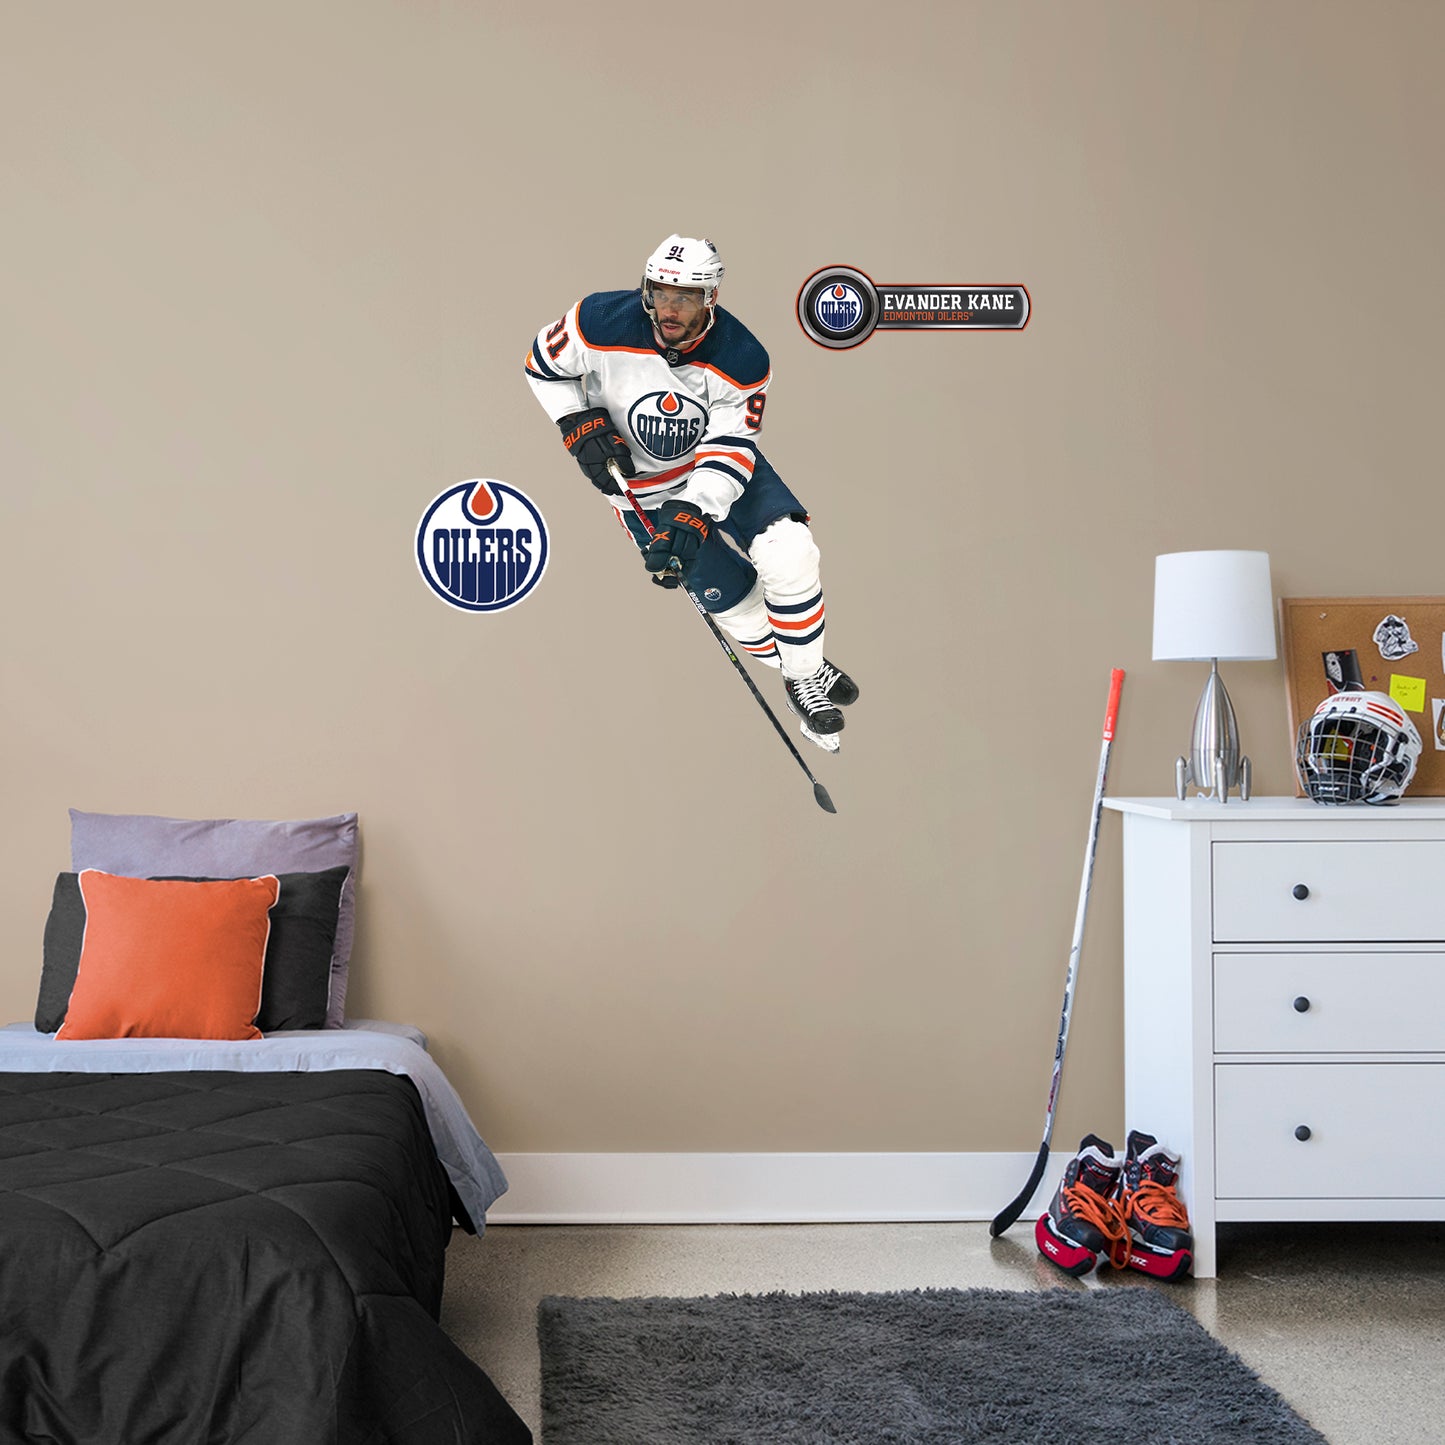 Edmonton Oilers: Evander Kane         - Officially Licensed NHL Removable     Adhesive Decal